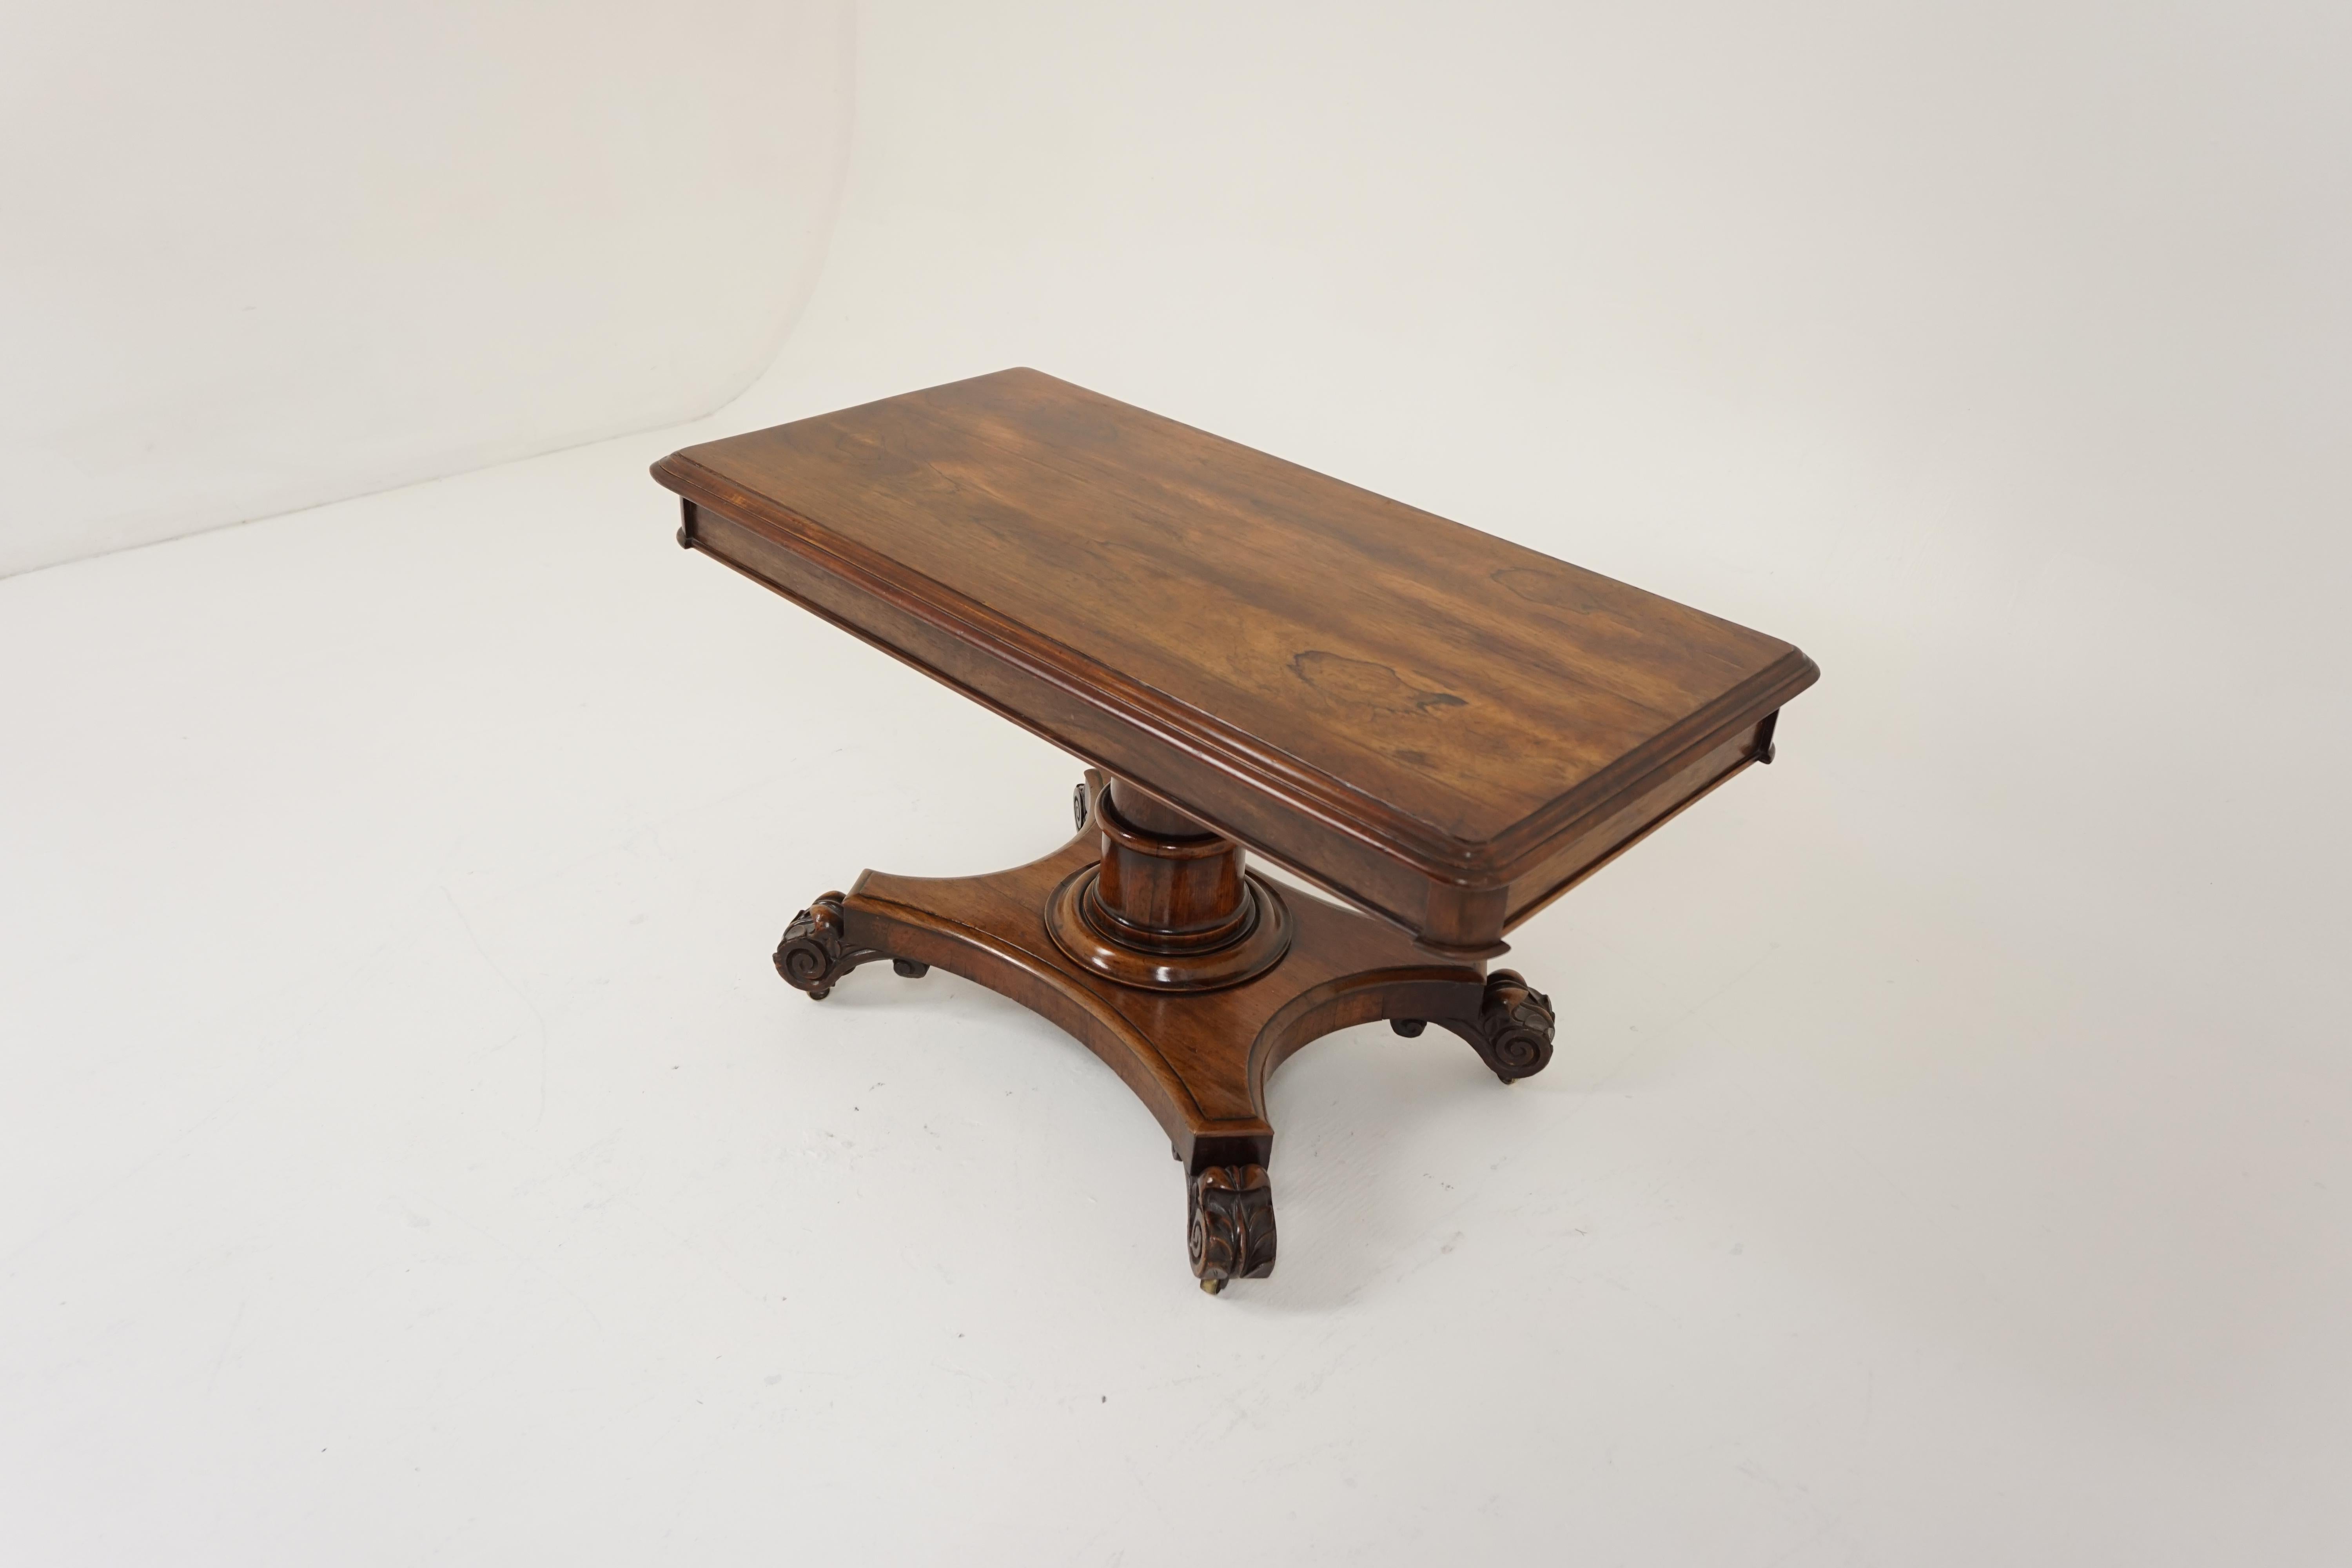 Early Victorian rosewood reduced coffee table, Scotland, 1840, B2054

Scotland 1840
SOlid rosewood with veneers
Original finish
Rectangular top with molded edge
Circular rosewood column underneath
Sitting on a platform that ends on four